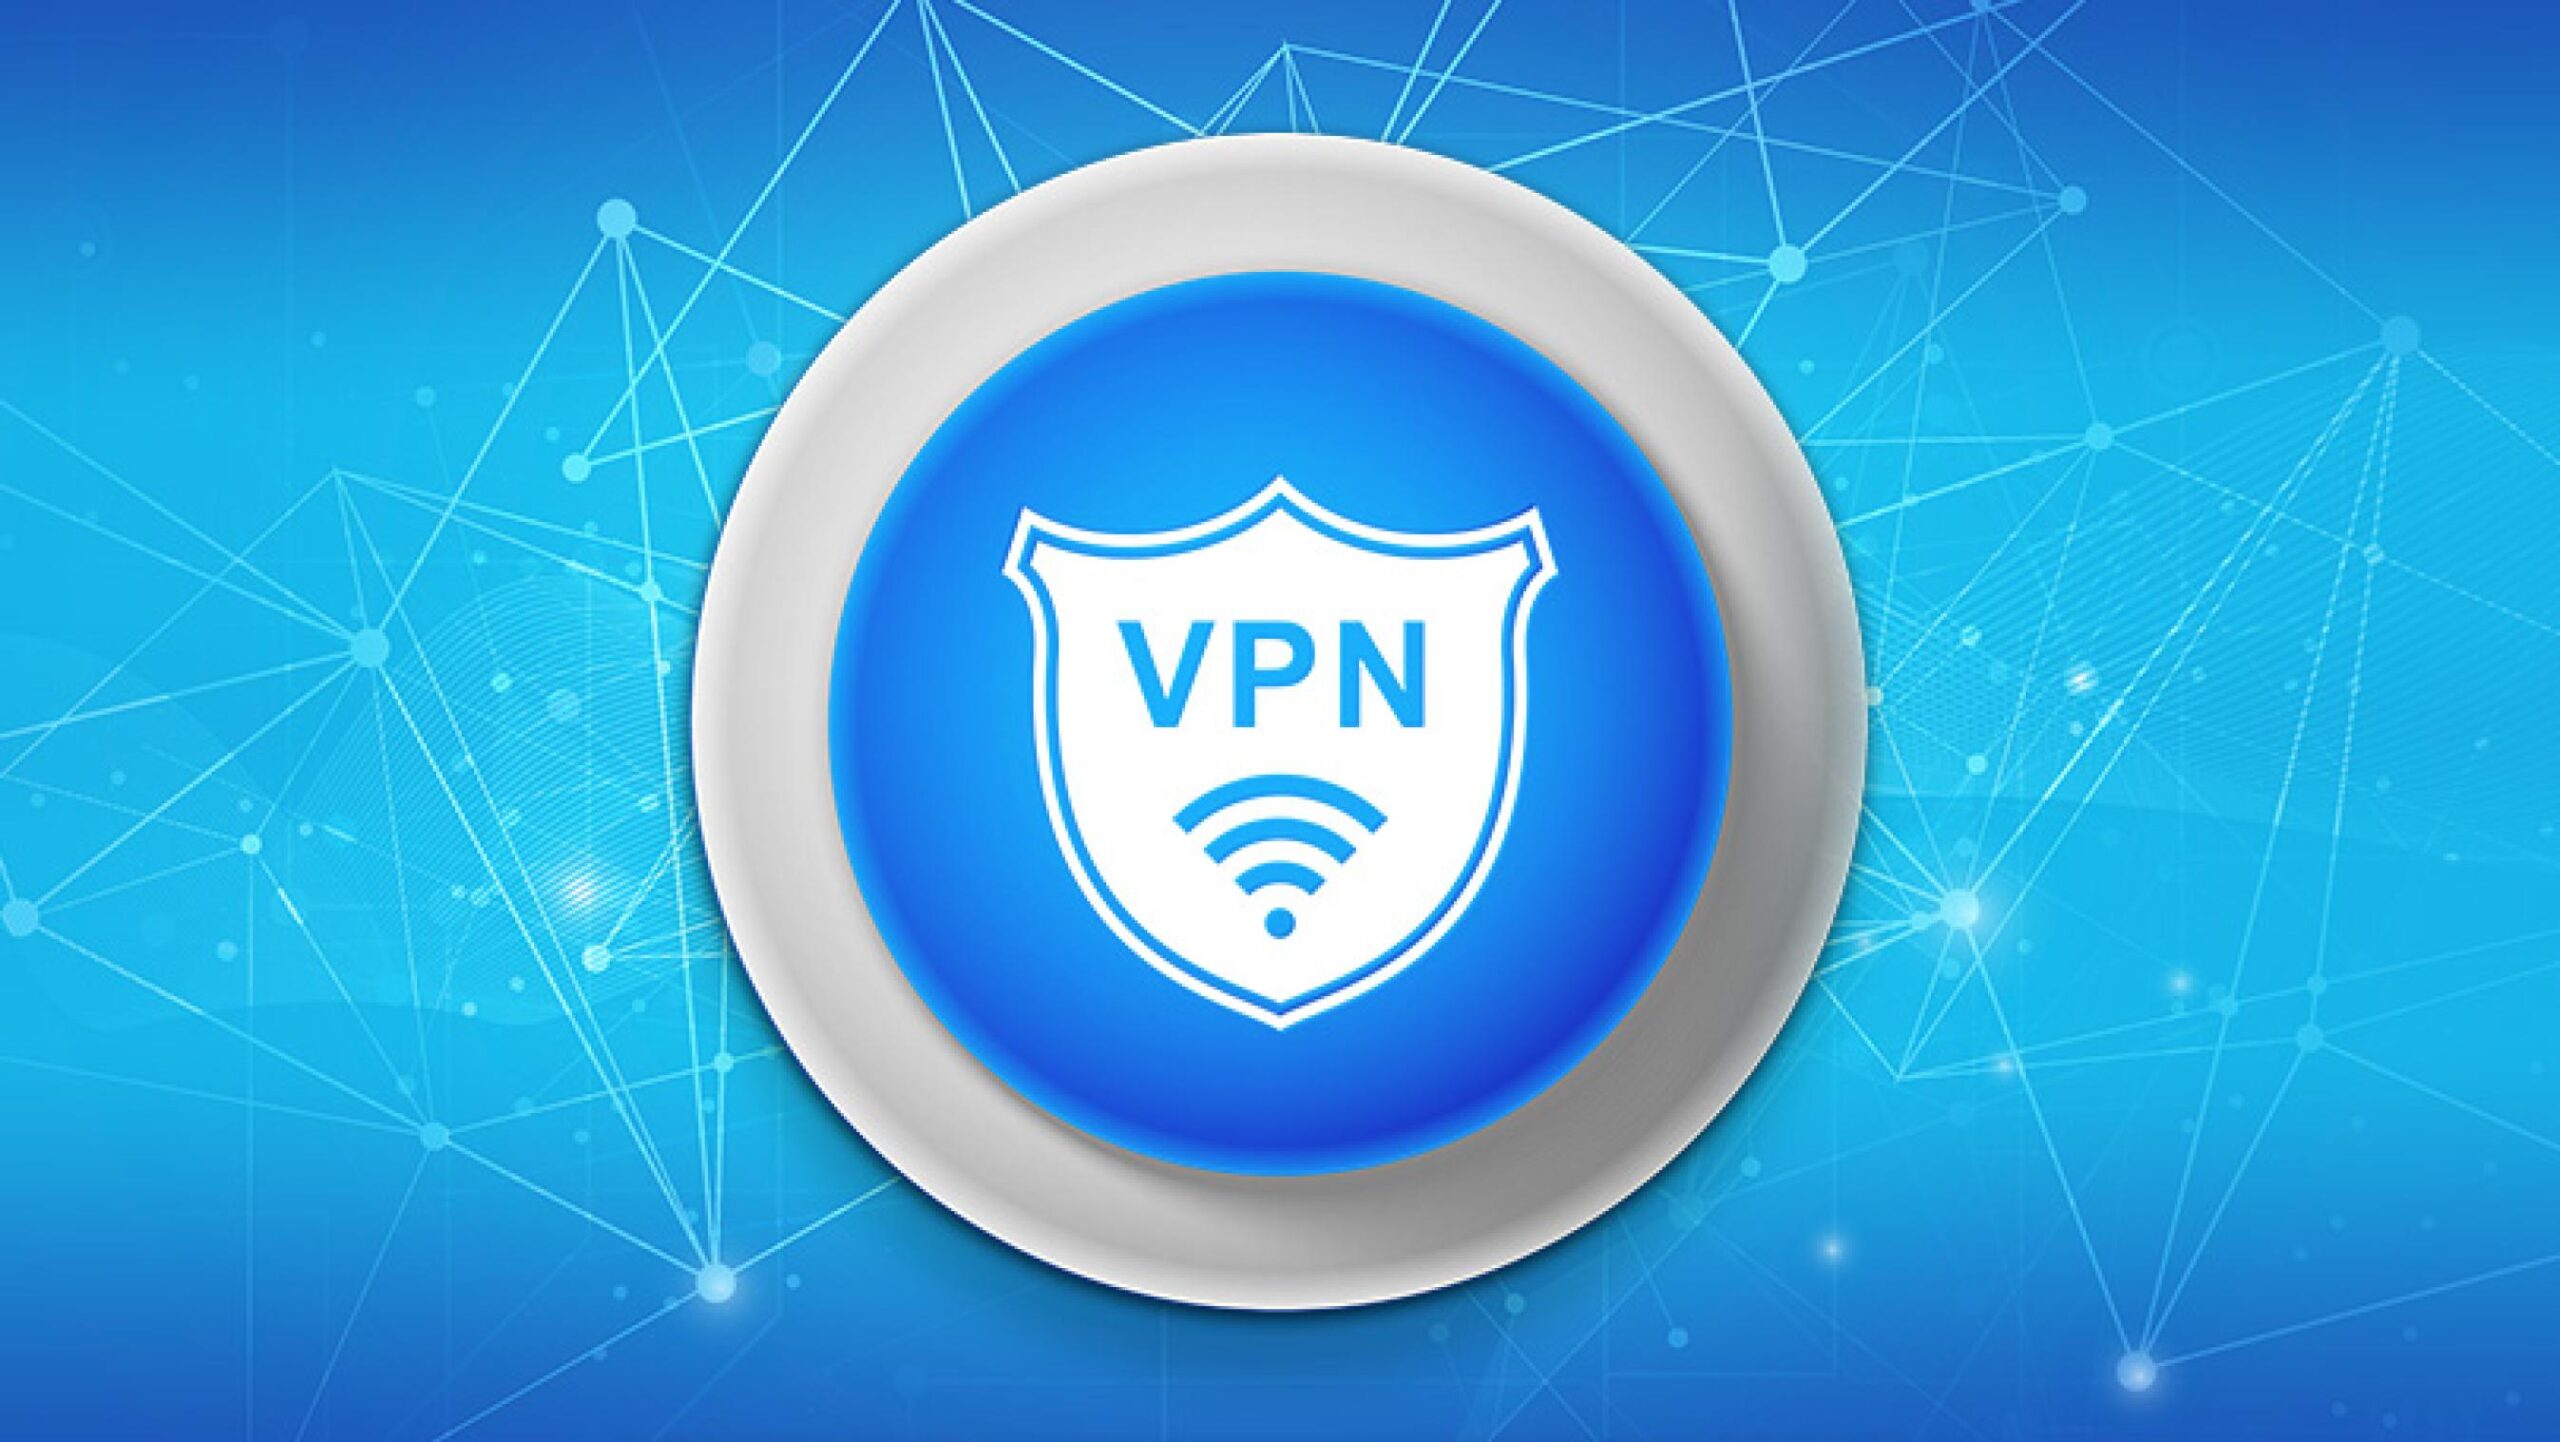 VPN software and apps